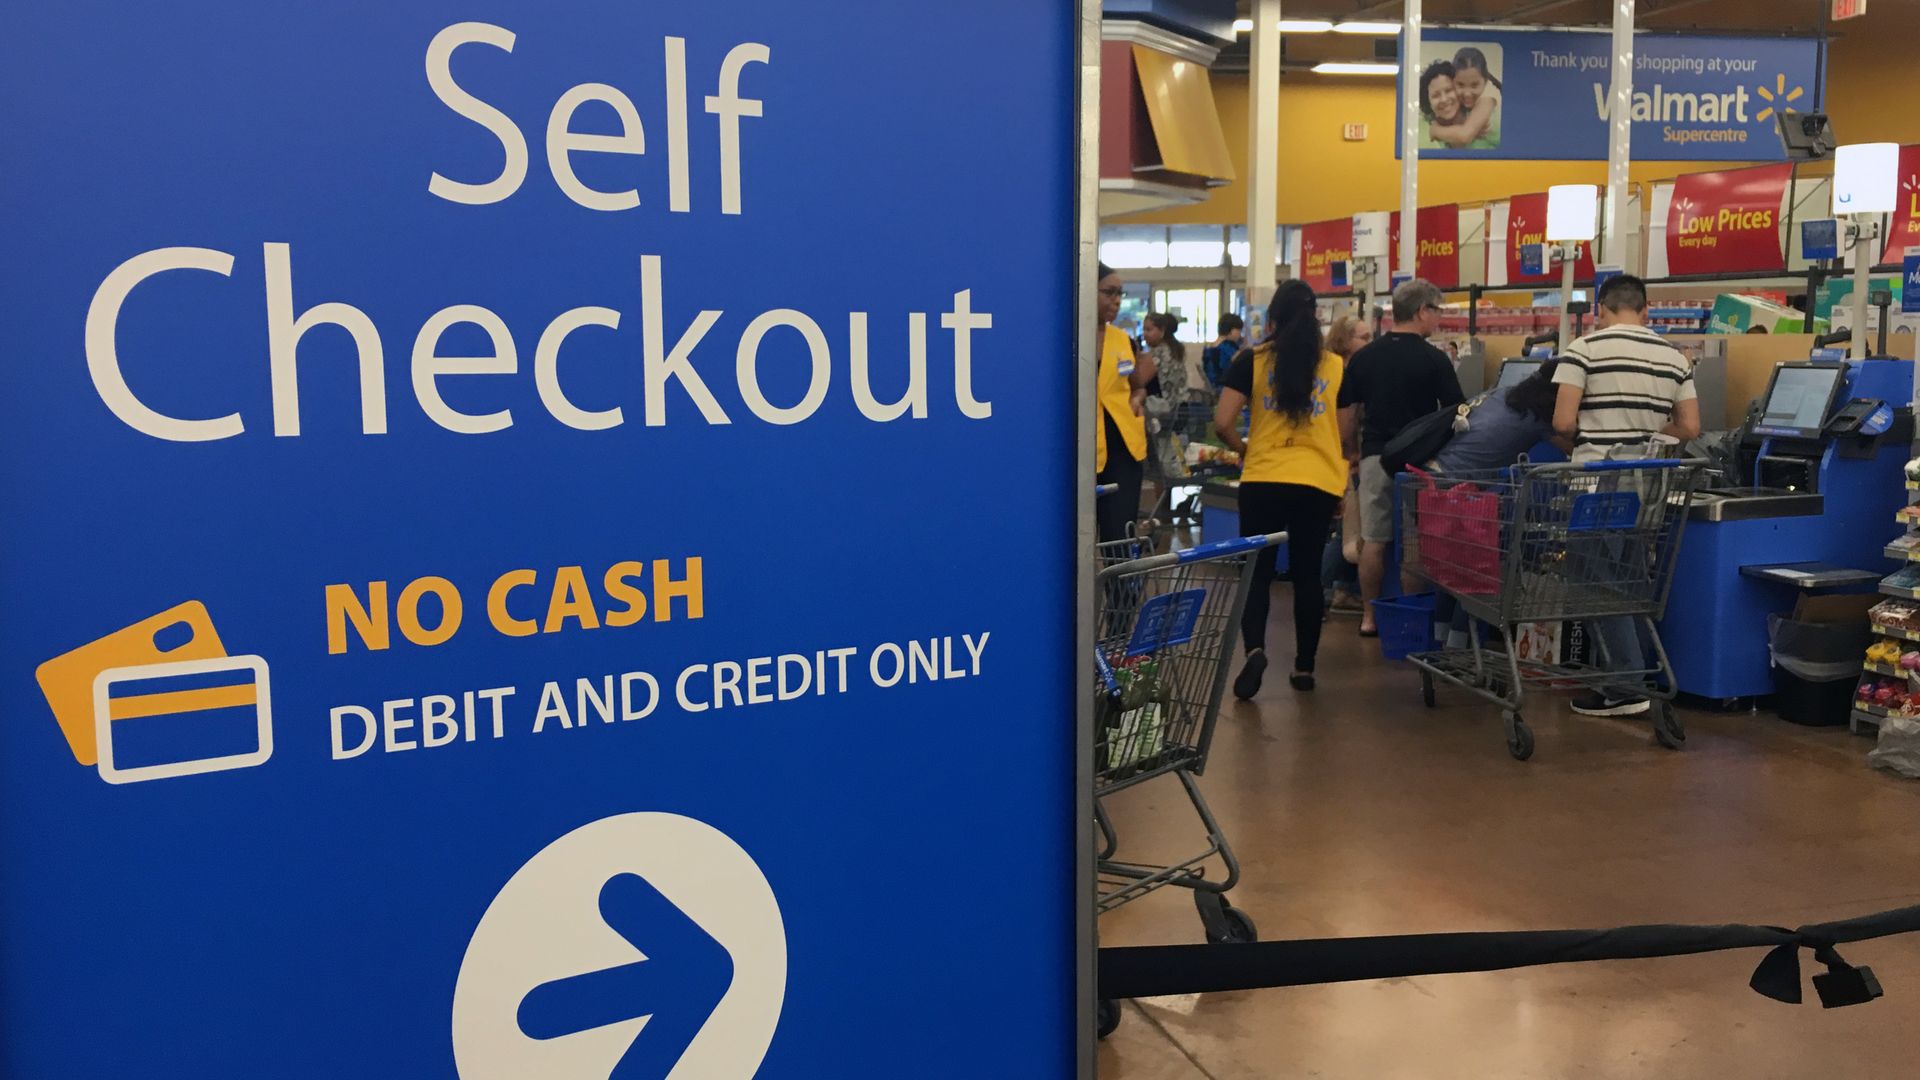 A sign in a Walmart pointing customers toward a self checkout